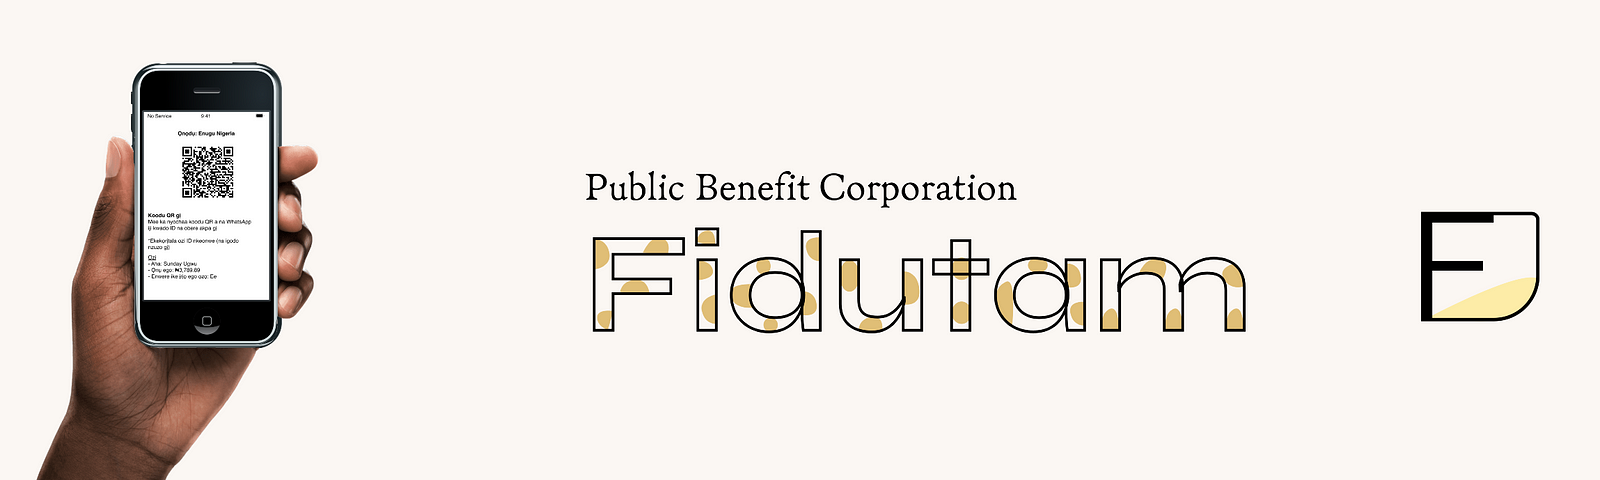 A banner with “Fidutam” at the center and “Public Benefit Corporation” in smaller font size above it. On its right side is the Fidutam logo and on its left side is a hand holding up a phone with an example of a Fidutam digital ID on its screen.